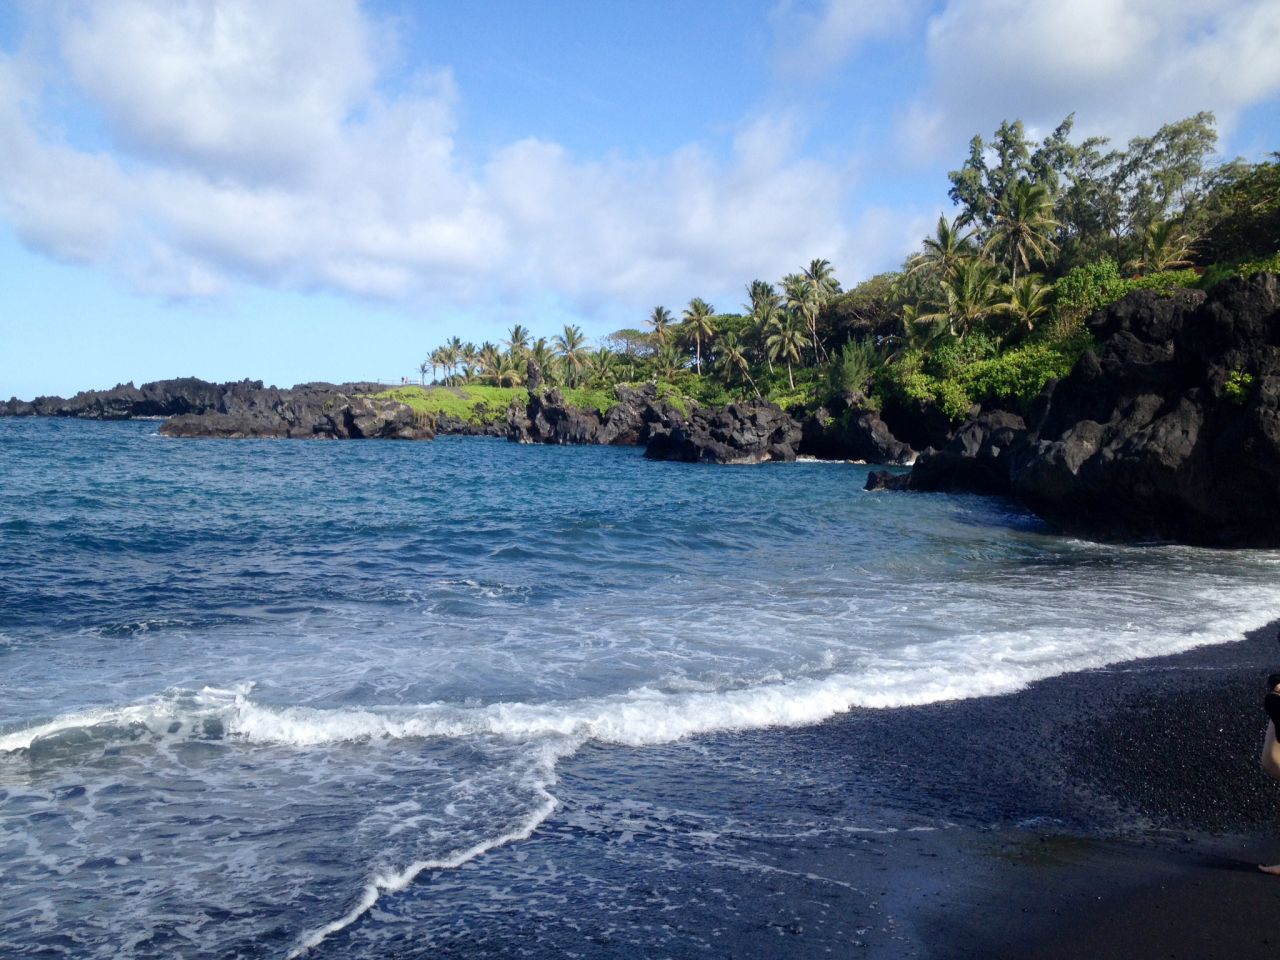 Low volcanic cliffs surround a small black sand beach at Waianapanapa State Park, off the famous Hana Highway in Maui.